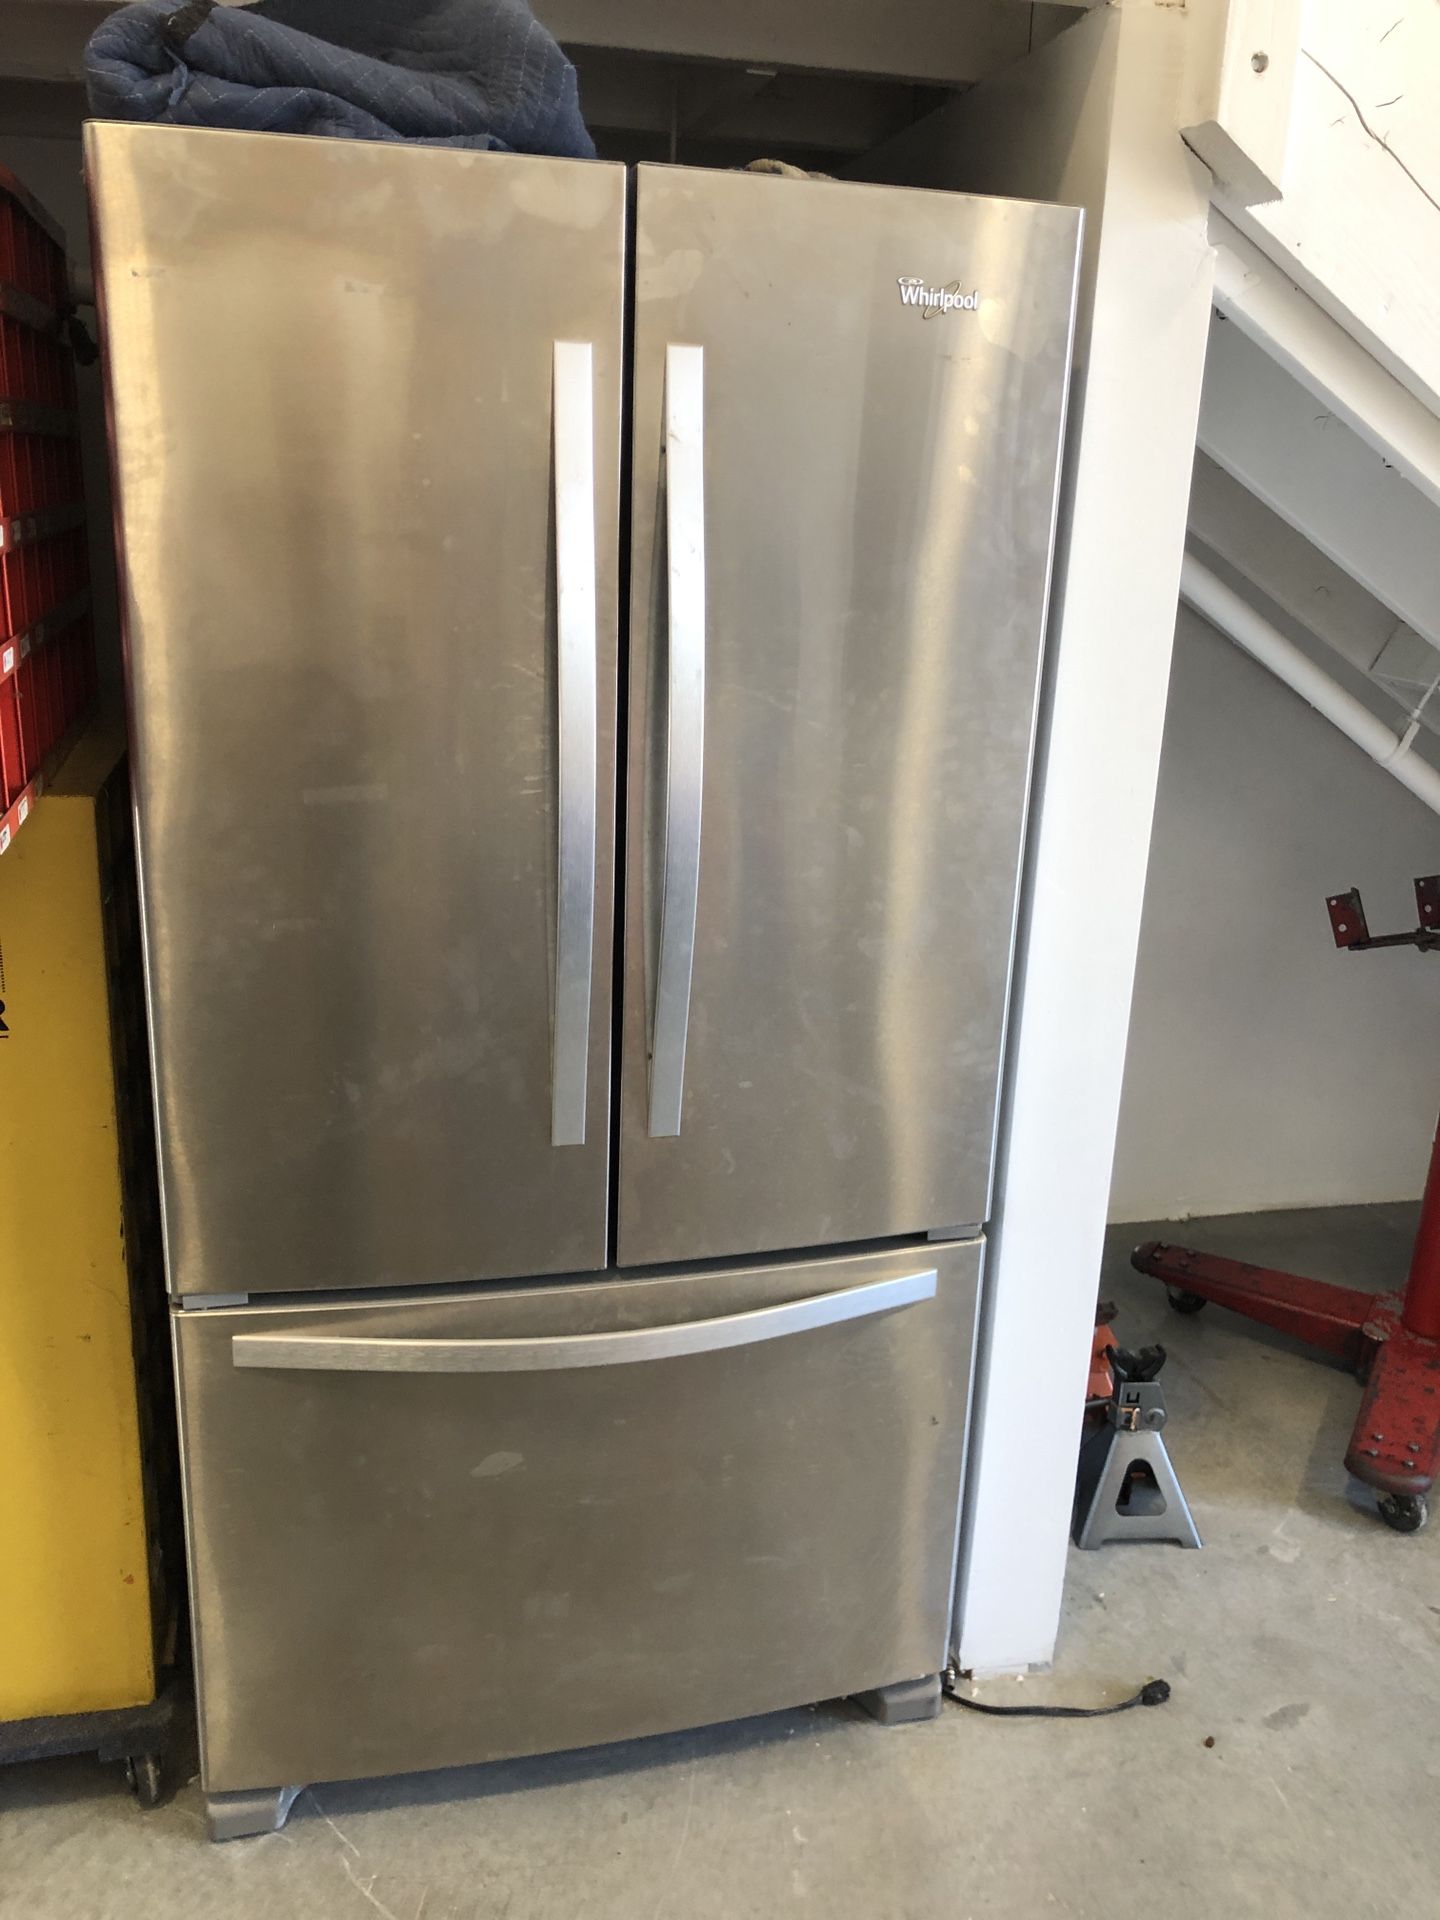 Whirlpool fridge. Used very little in a business. Large freezer, side by side doors